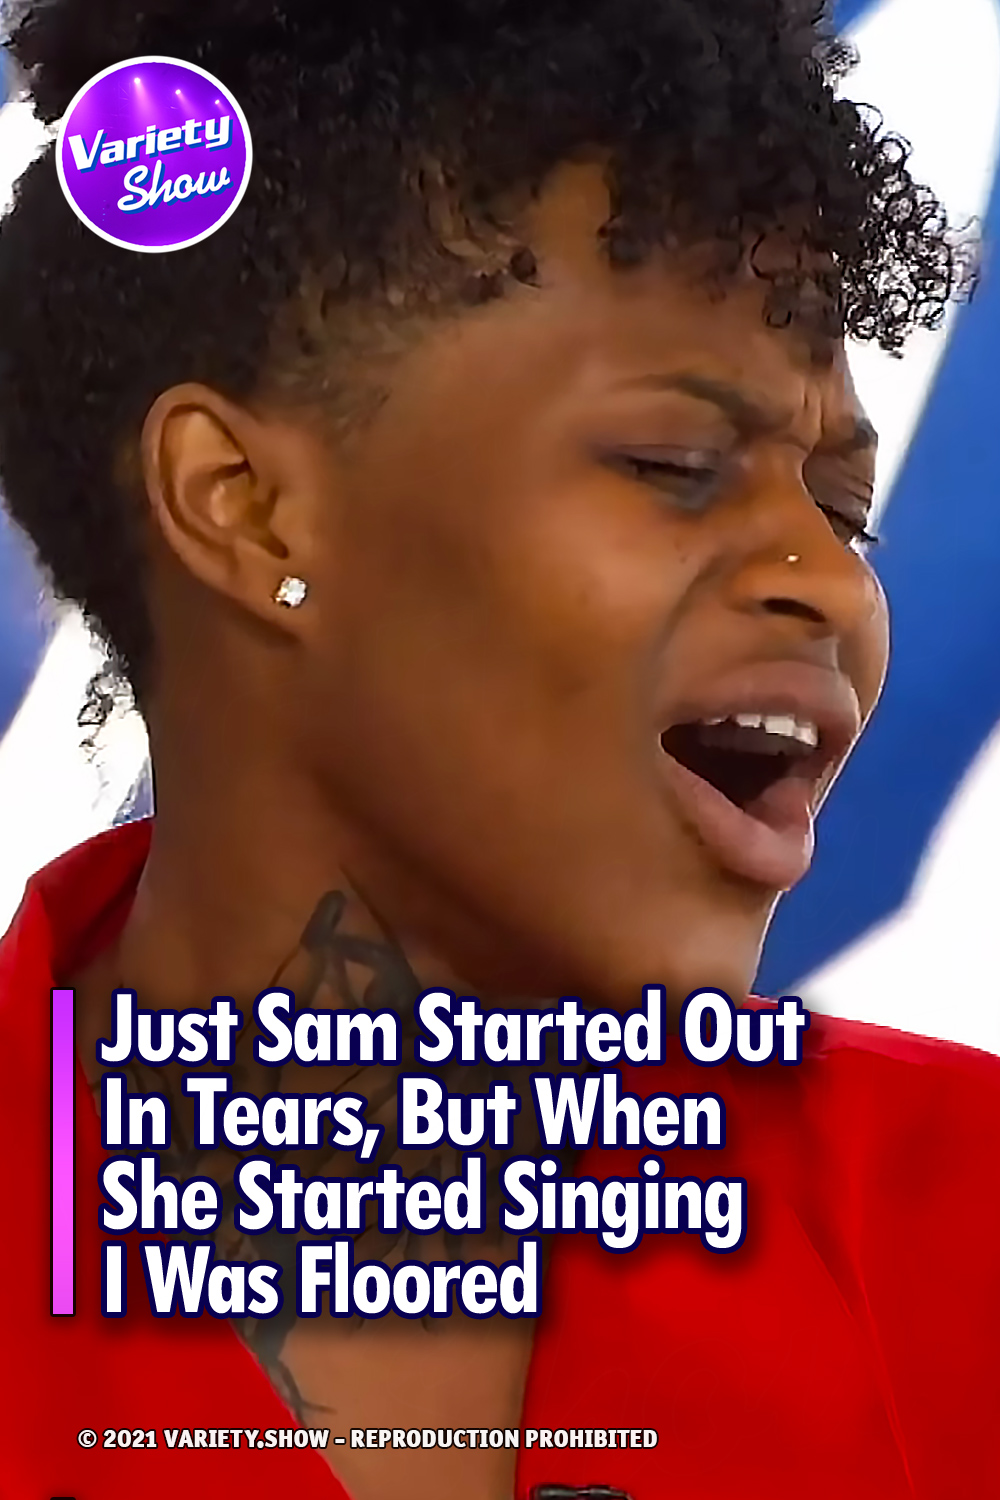 Just Sam Started Out In Tears, But When She Started Singing I Was Floored